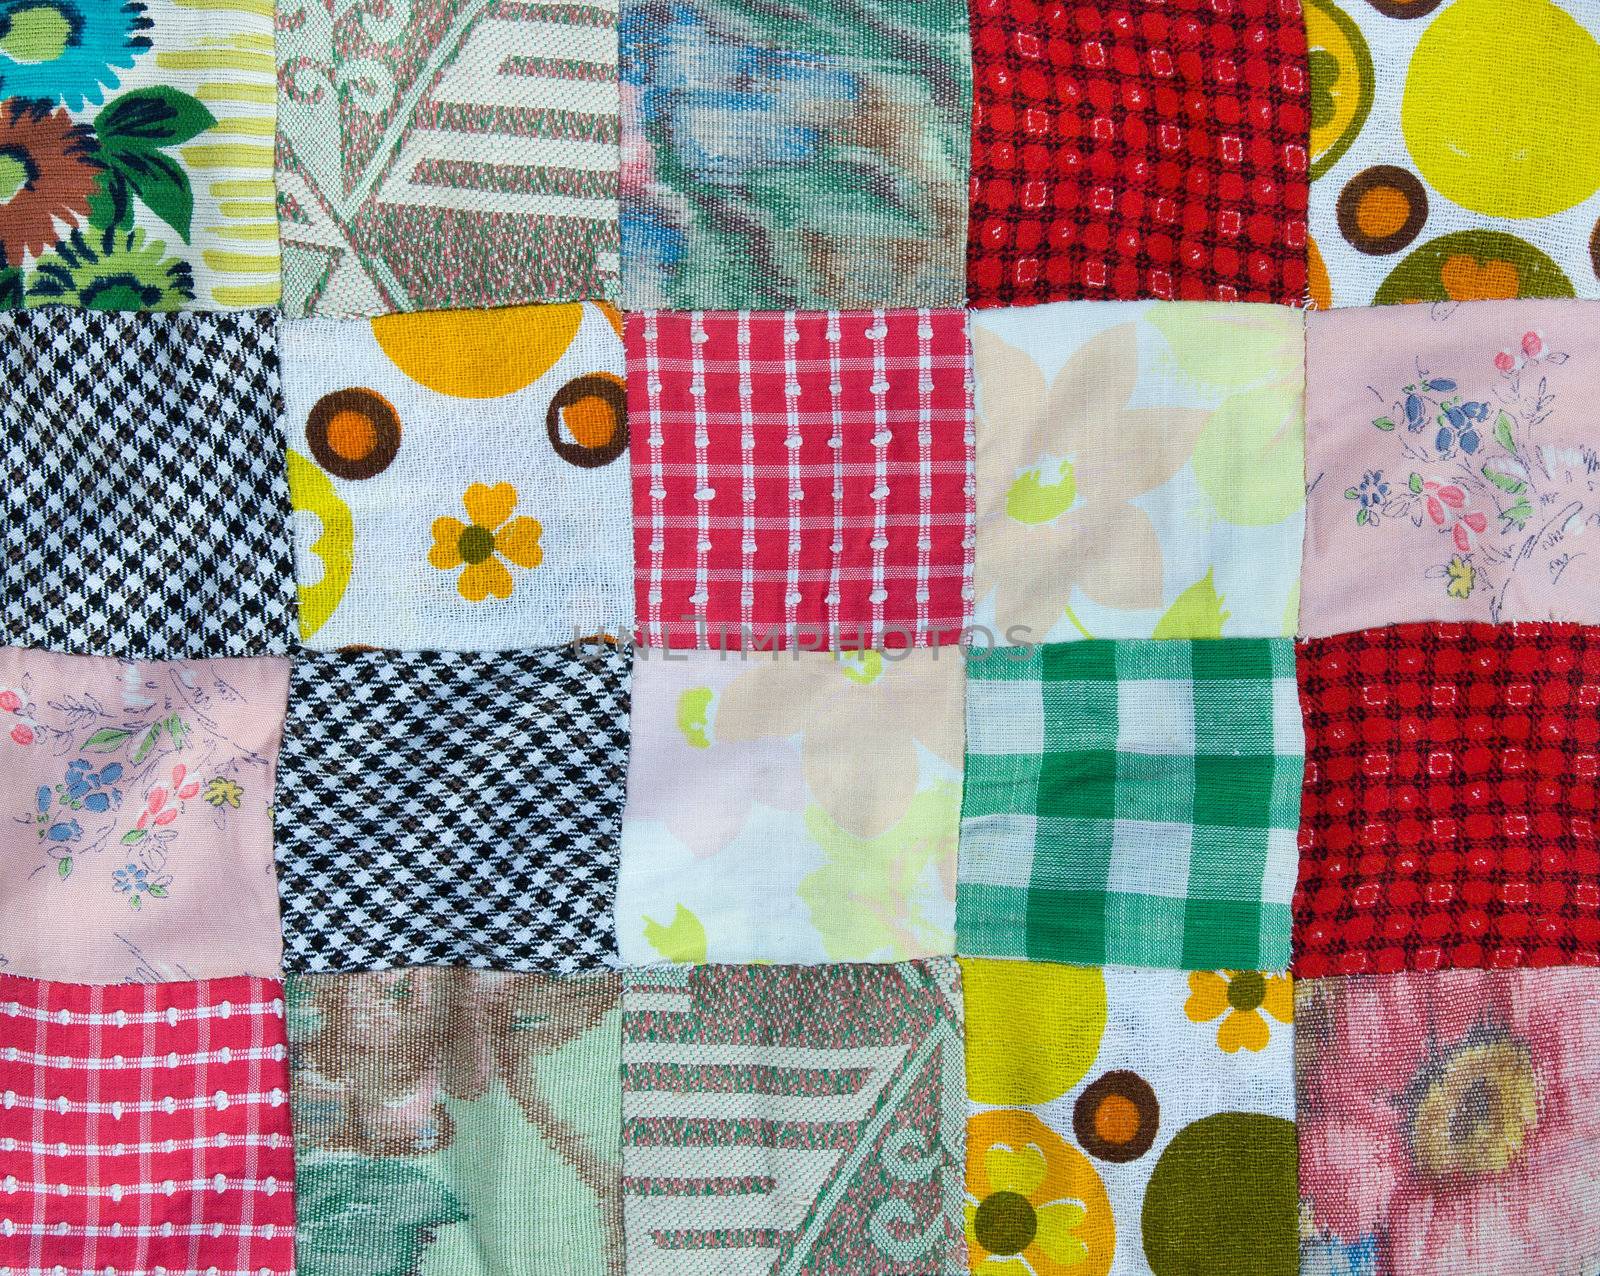 Patchwork background by RuthBlack